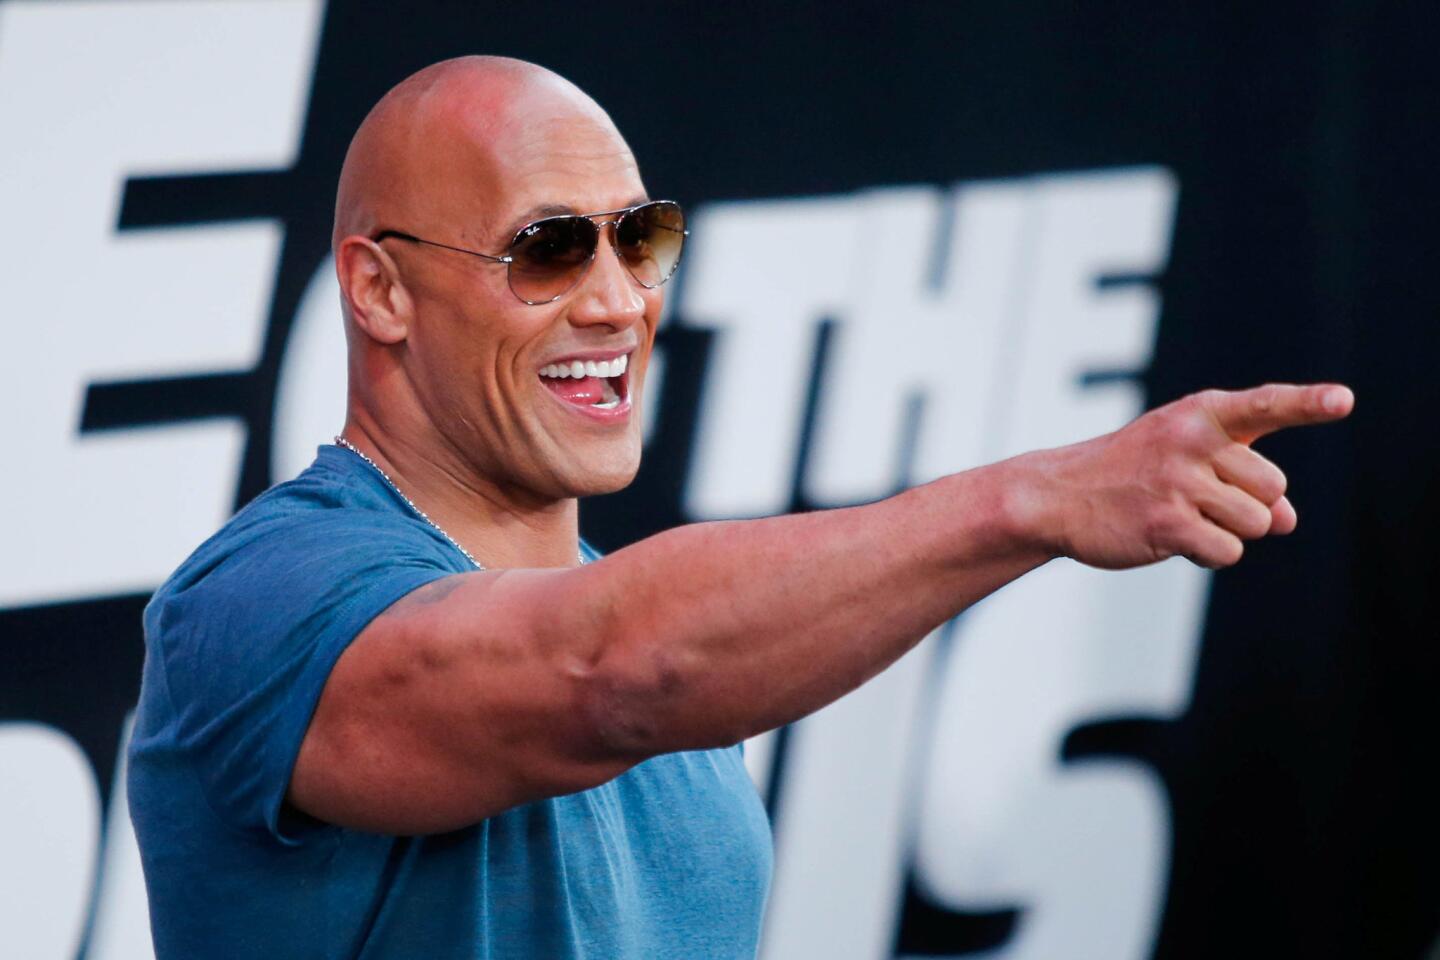 Dwayne Johnson attends 'The Fate Of The Furious' New York premiere at Radio City Music Hall in New York